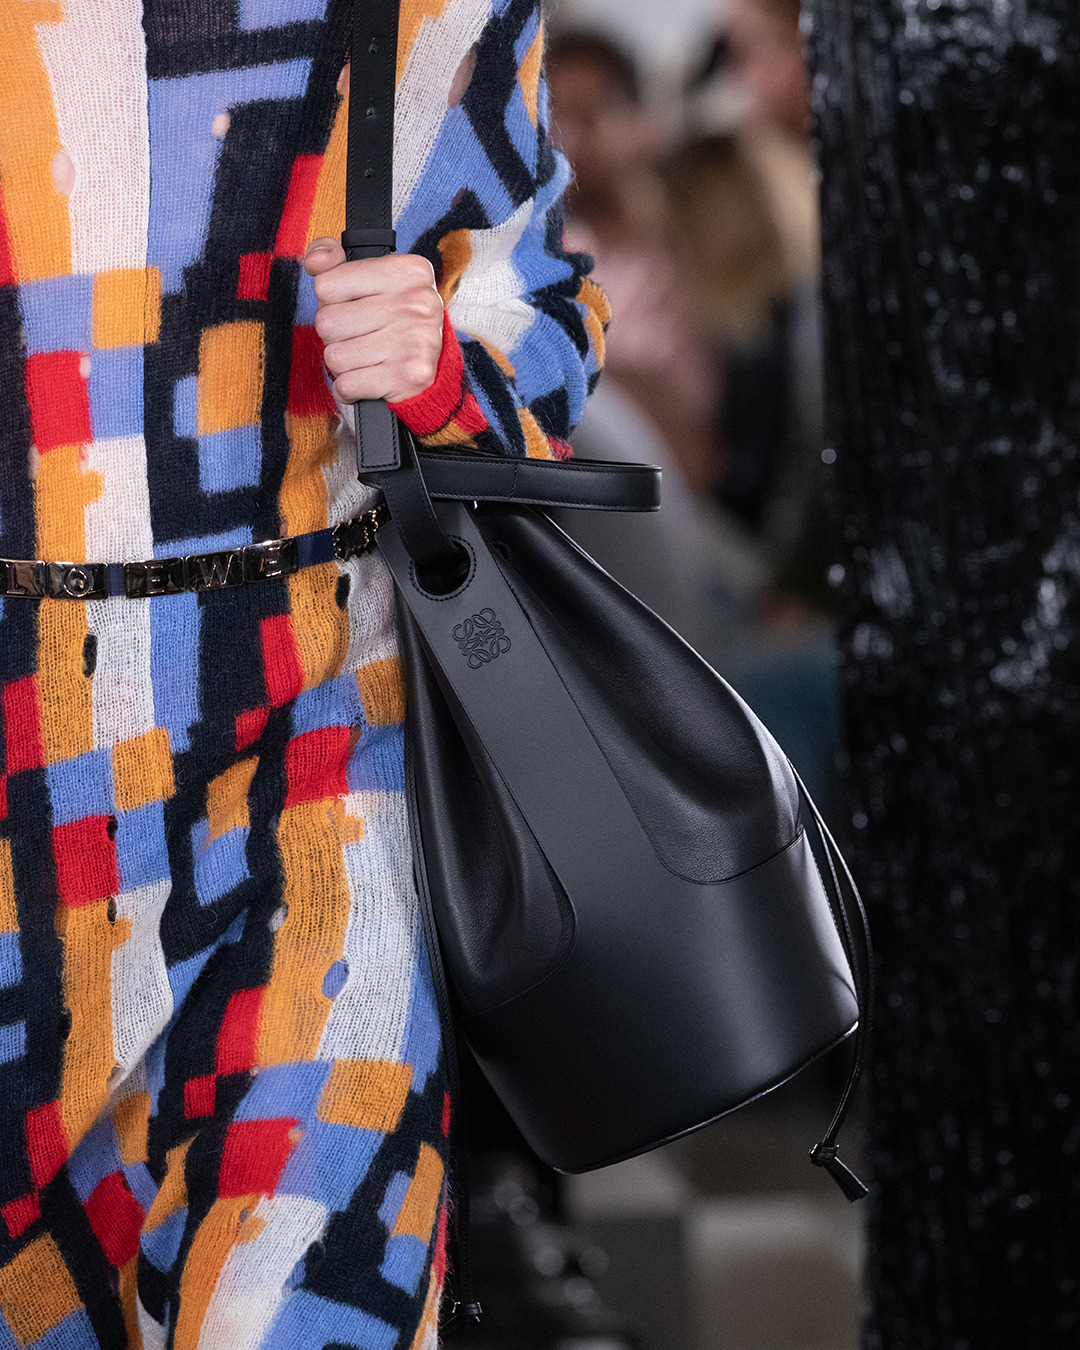 LOEWE - The new Balloon backpack crafted in black leather debuted at the LOEWE FW20 Men's show.

Now available on loewe.com

#LOEWE #LOEWEFW20 #BalloonBag